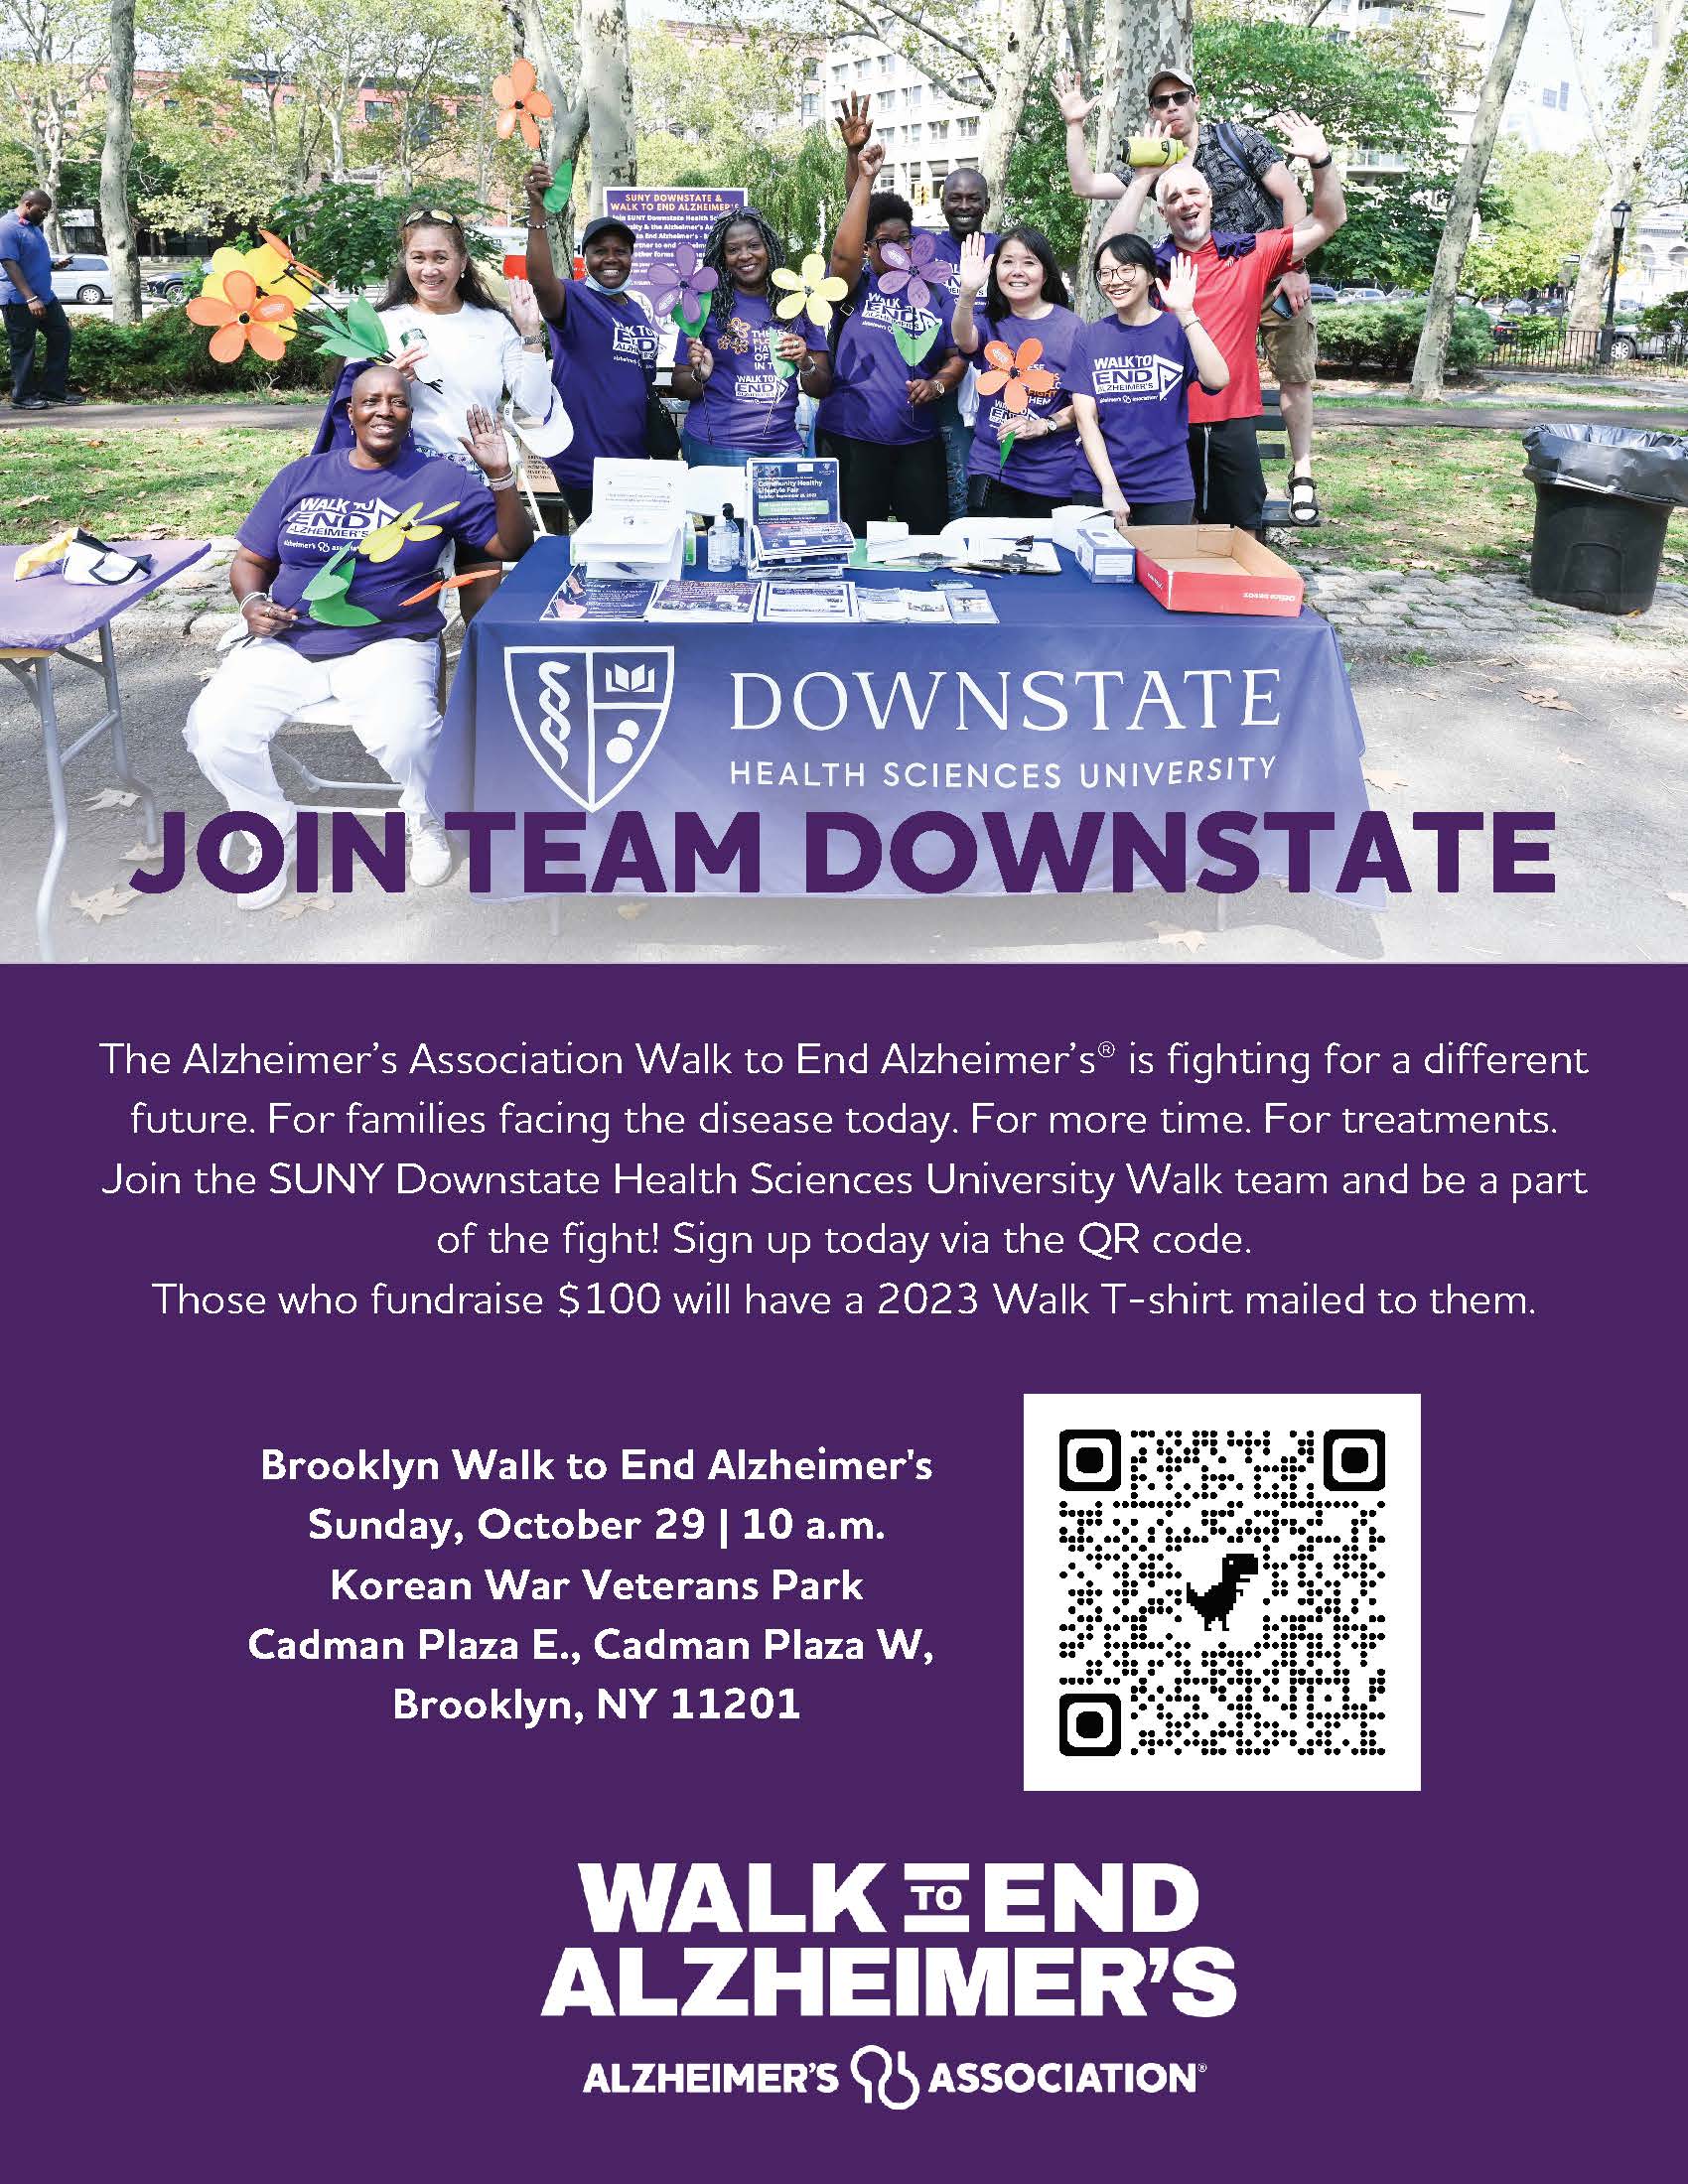 Walk to end Alzheimers Poster